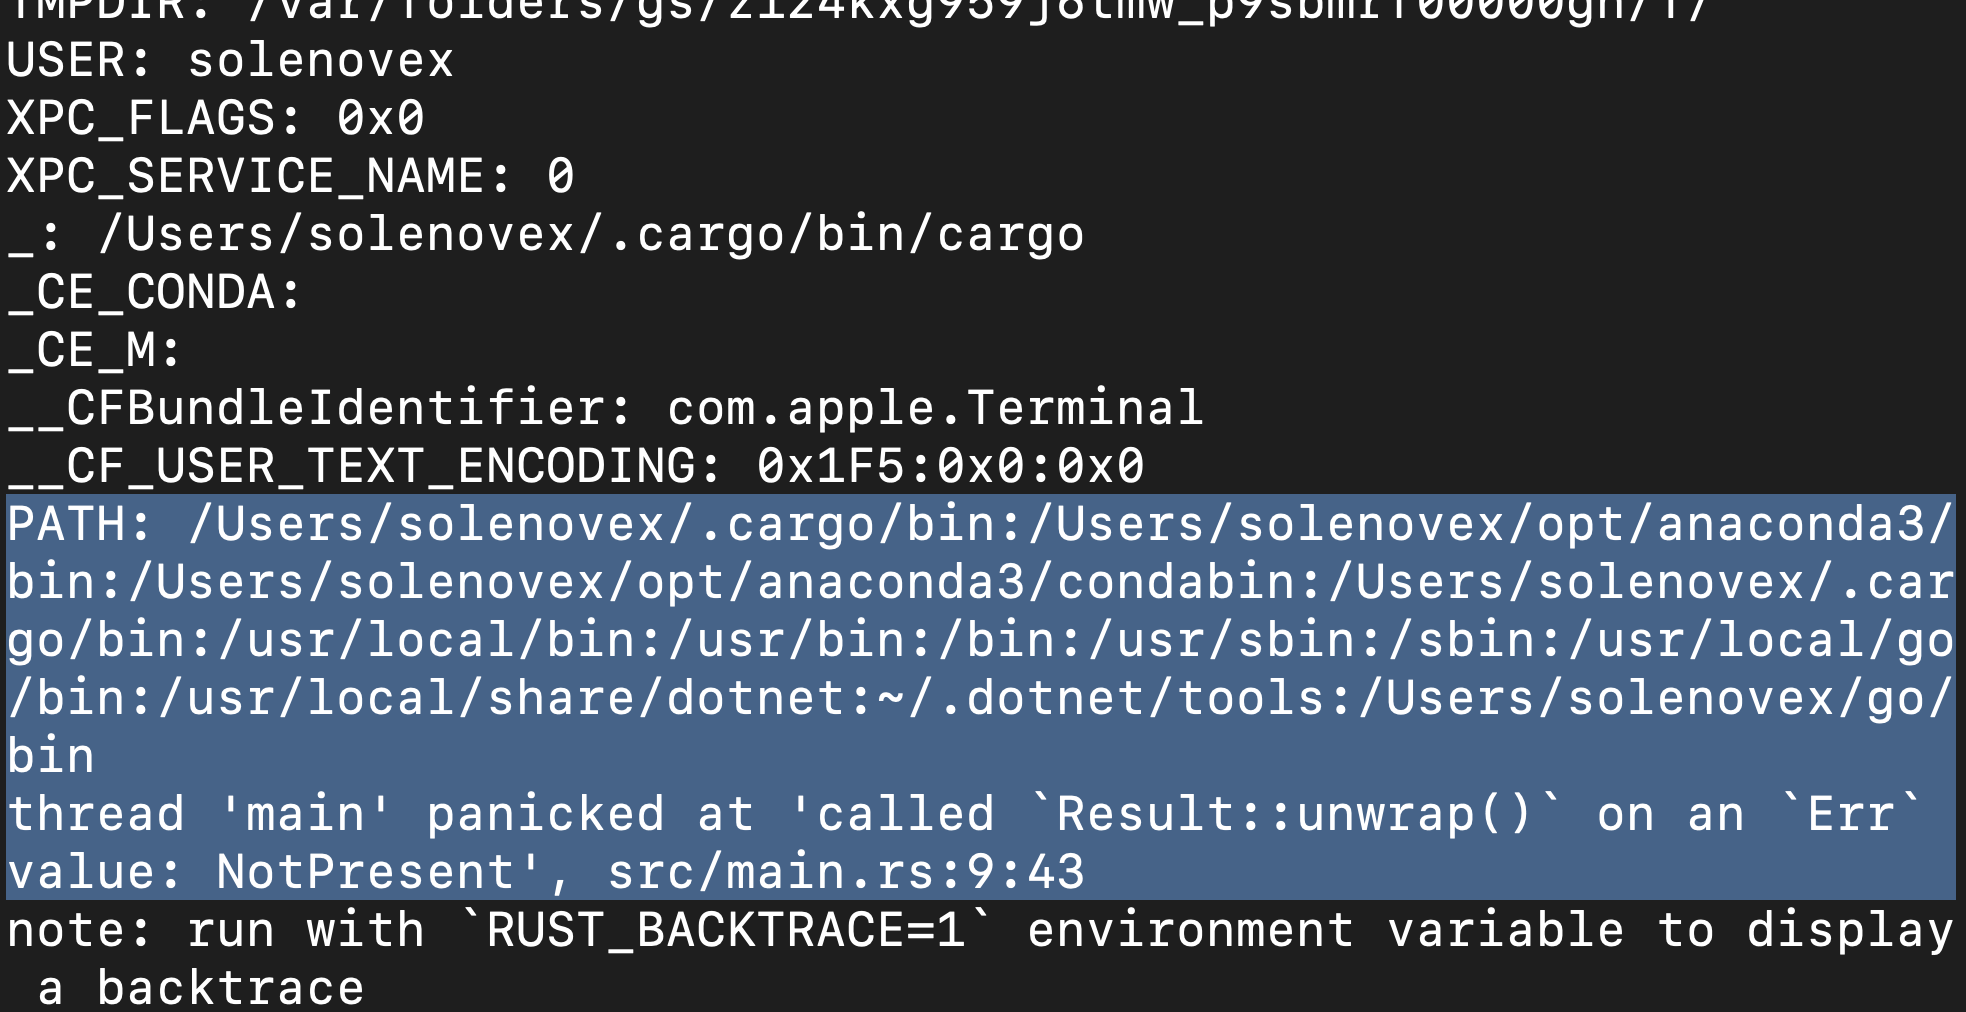 USER: solenovex 
XPC FLAGS: exe 
XPC SERVICE NAME: e 
/Users/s01enovex/ . cargo/ bin/ cargo 
CE CONDA: 
CE M: 
_CFBund1eIdentifier: com.apple.Terminal 
CF USER TEXT ENCODING: 
PATH: /Users/s01enovex/.cargo/bin: / Users/ solenovex/opt/anaconda3 
bin : /Users/s01enovex/opt/anaconda3/condabin : /Users/s01enovex/ . car 
go/bin: /usr/local/bin : /usr/bin : / bin : /usr/sbin : /sbin : /usr/local/go 
/ bin : /usr/local/share/dotnet : N/ . dotnet/tools : / Users/ solenovex/go/ 
bin 
thread Imainl panicked at I called 
on an 'Err' 
src/main.rs:9:43 
value: NotPresentI, 
note: run with 'RUST BACKTRACE-I' 
environment variable to display 
a backtrace 